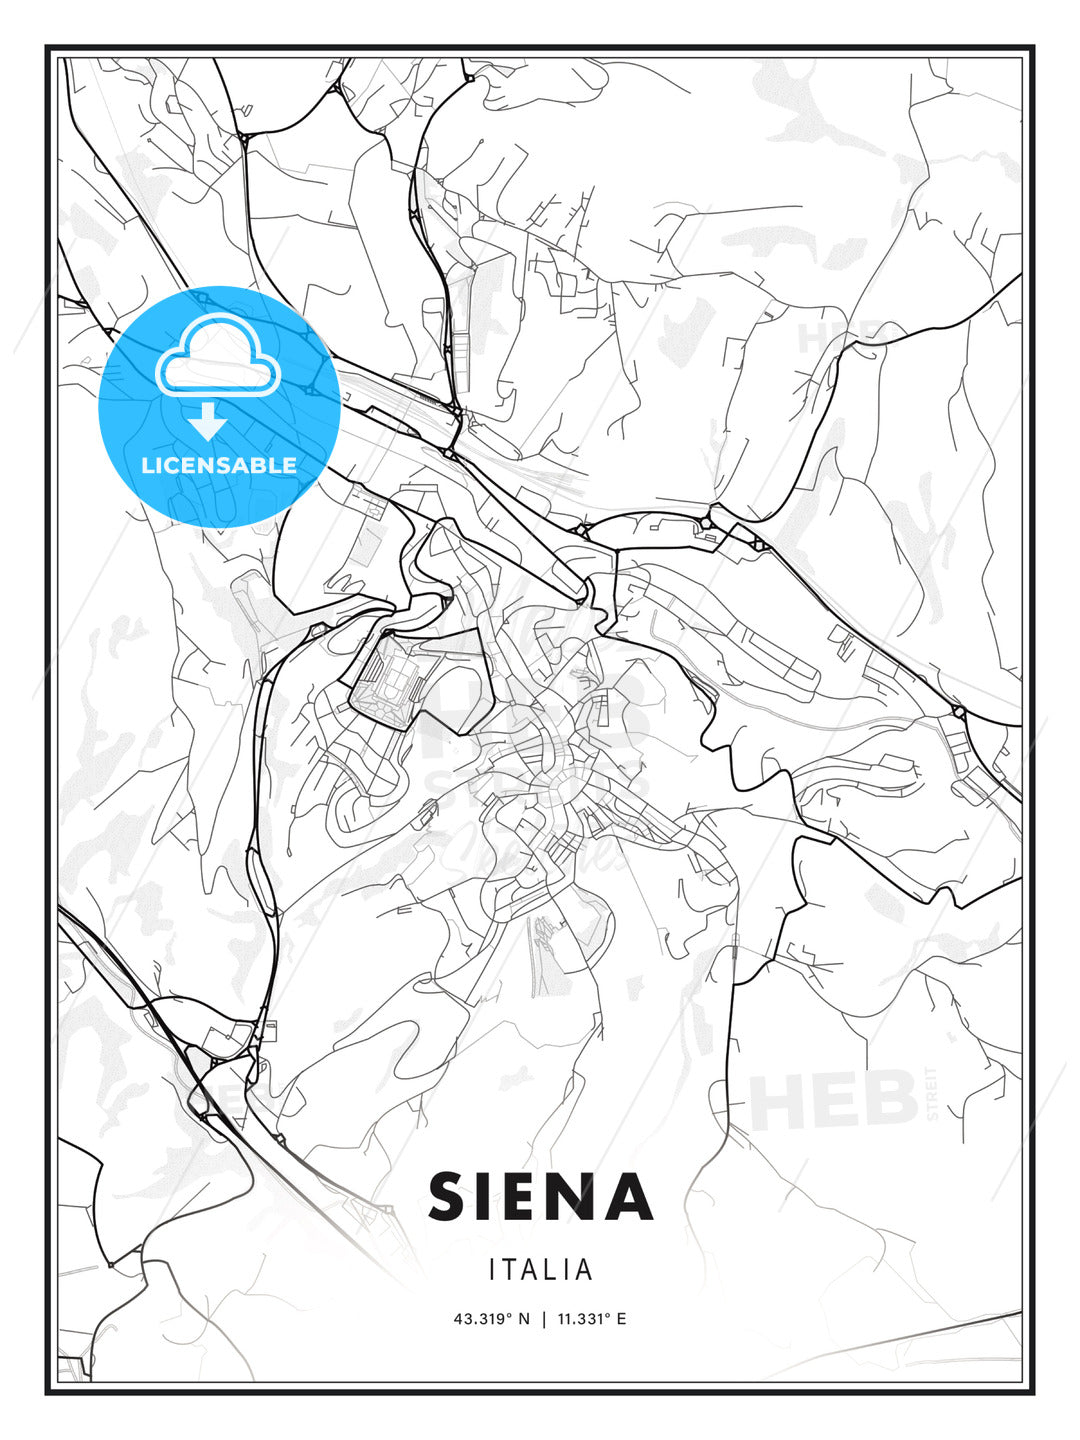 Siena, Italy, Modern Print Template in Various Formats - HEBSTREITS Sketches